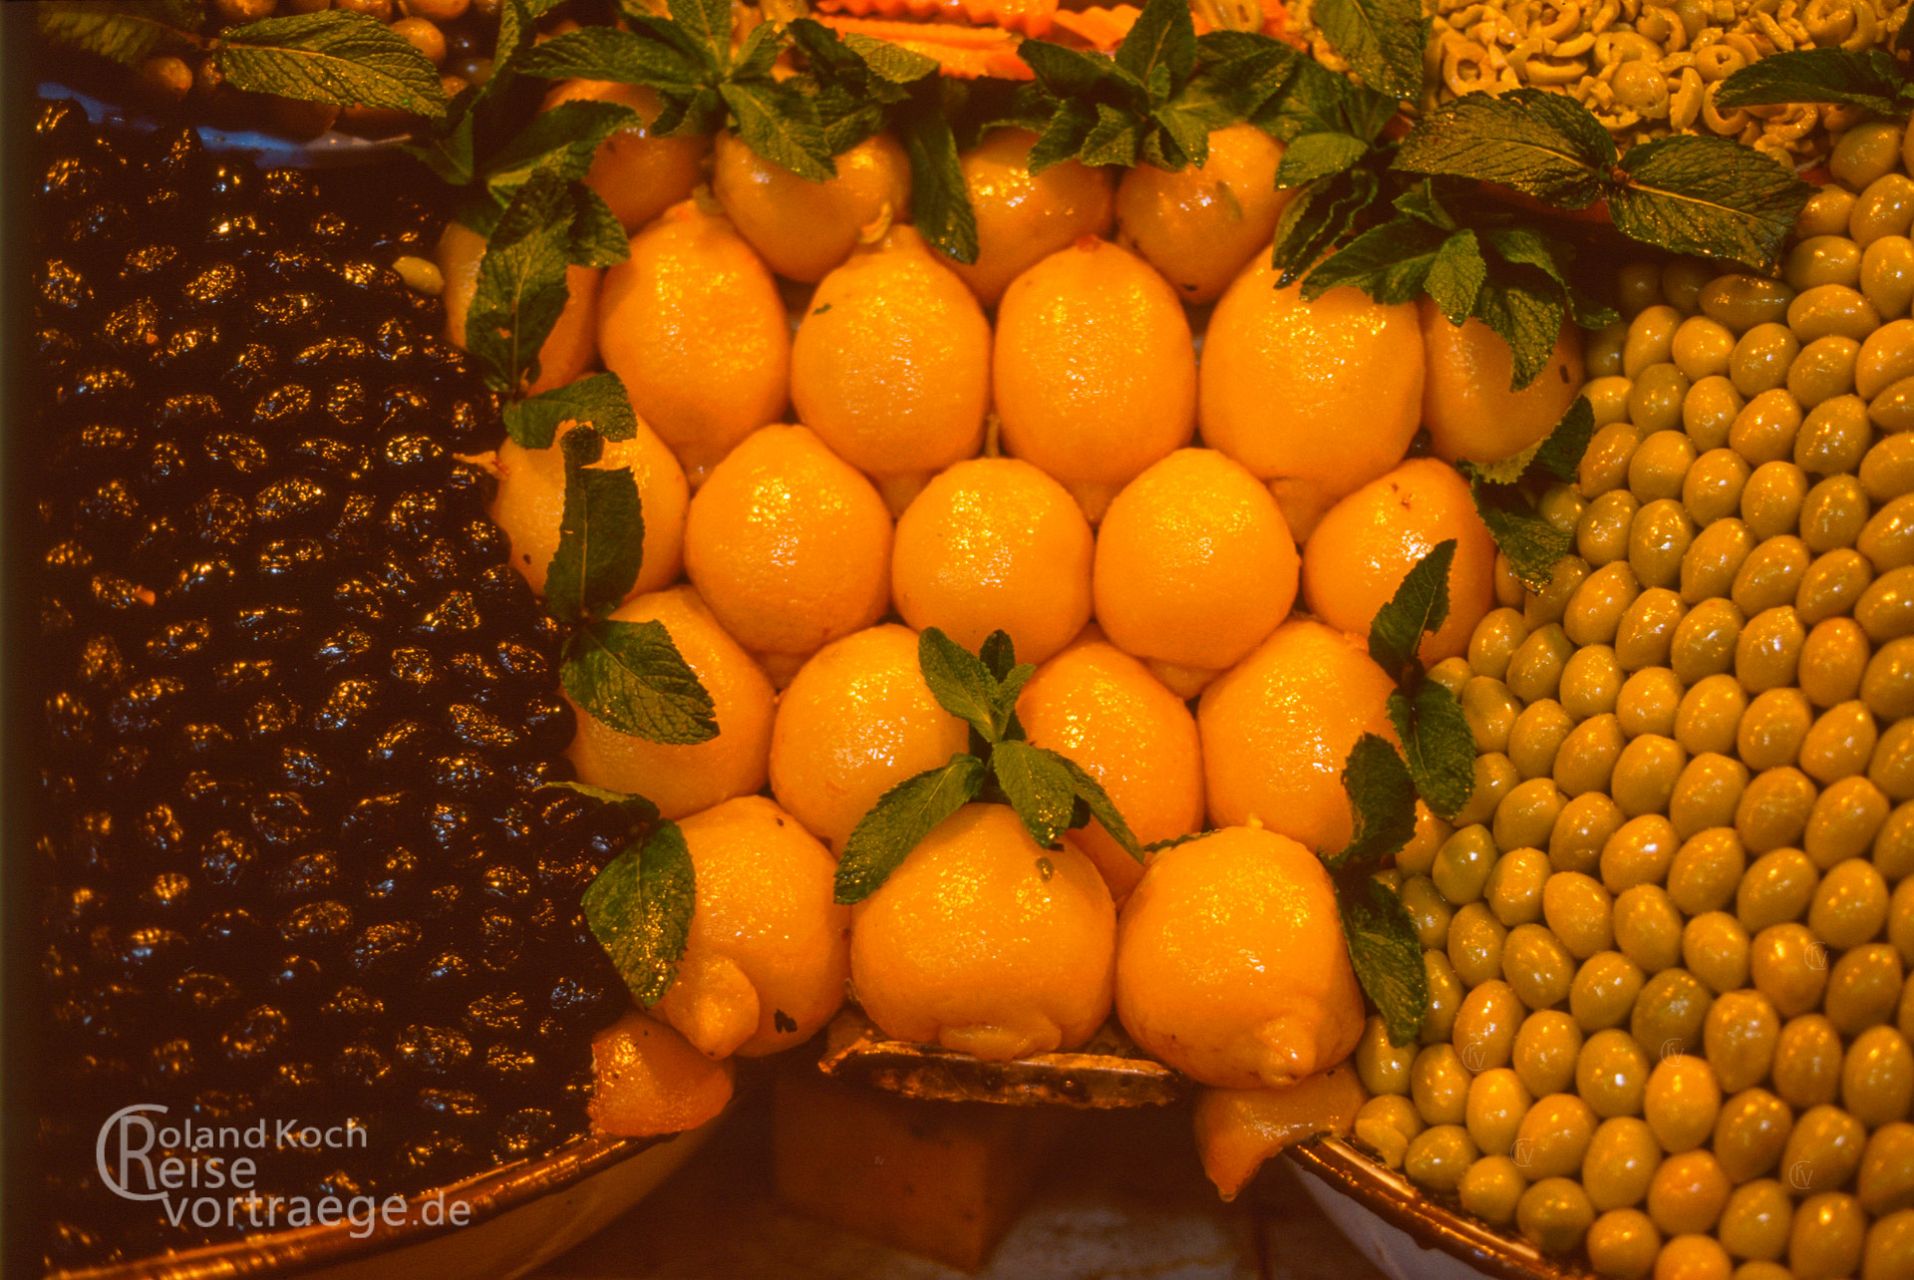 Moroccan cuisine - salted lemons and olives in the souk